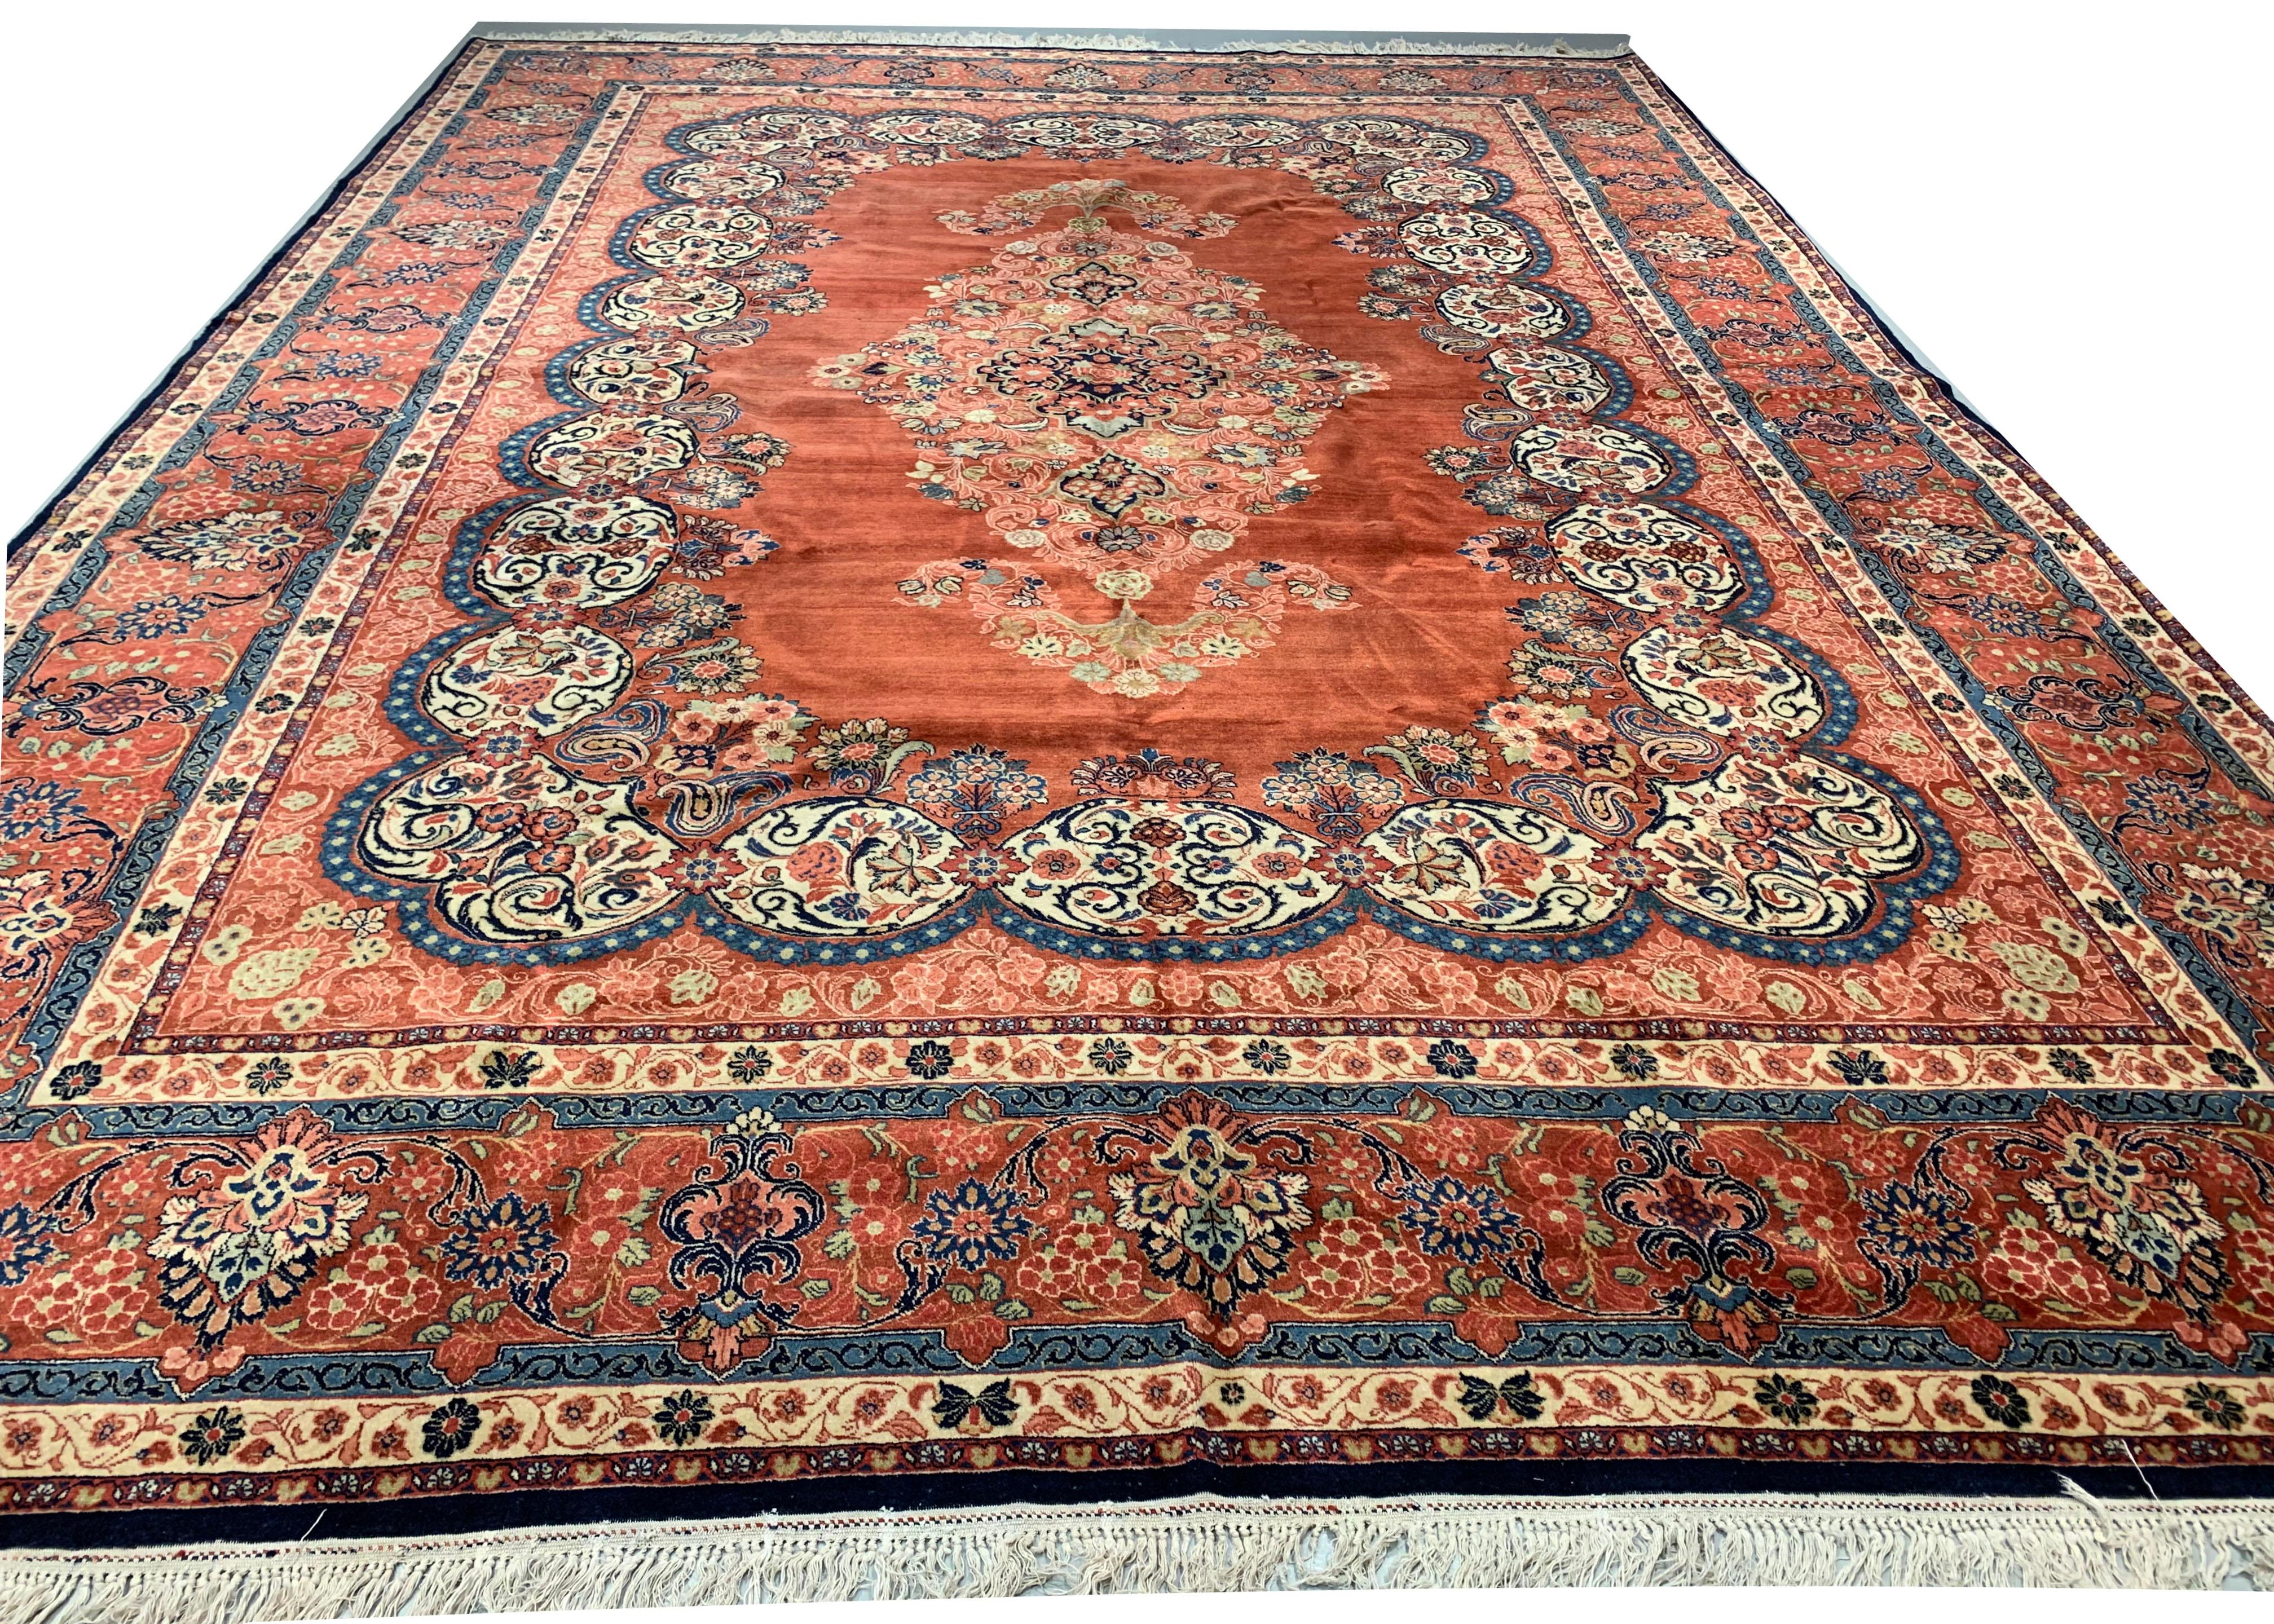 Antique Persian Tabriz rug 9'10 x 13'9. A wonderful Tabriz rug the central medallion filled with floral elements surrounded by ivory swirls repeating the floral theme. Enclosed by a main border and two guard borders again continuing the flower